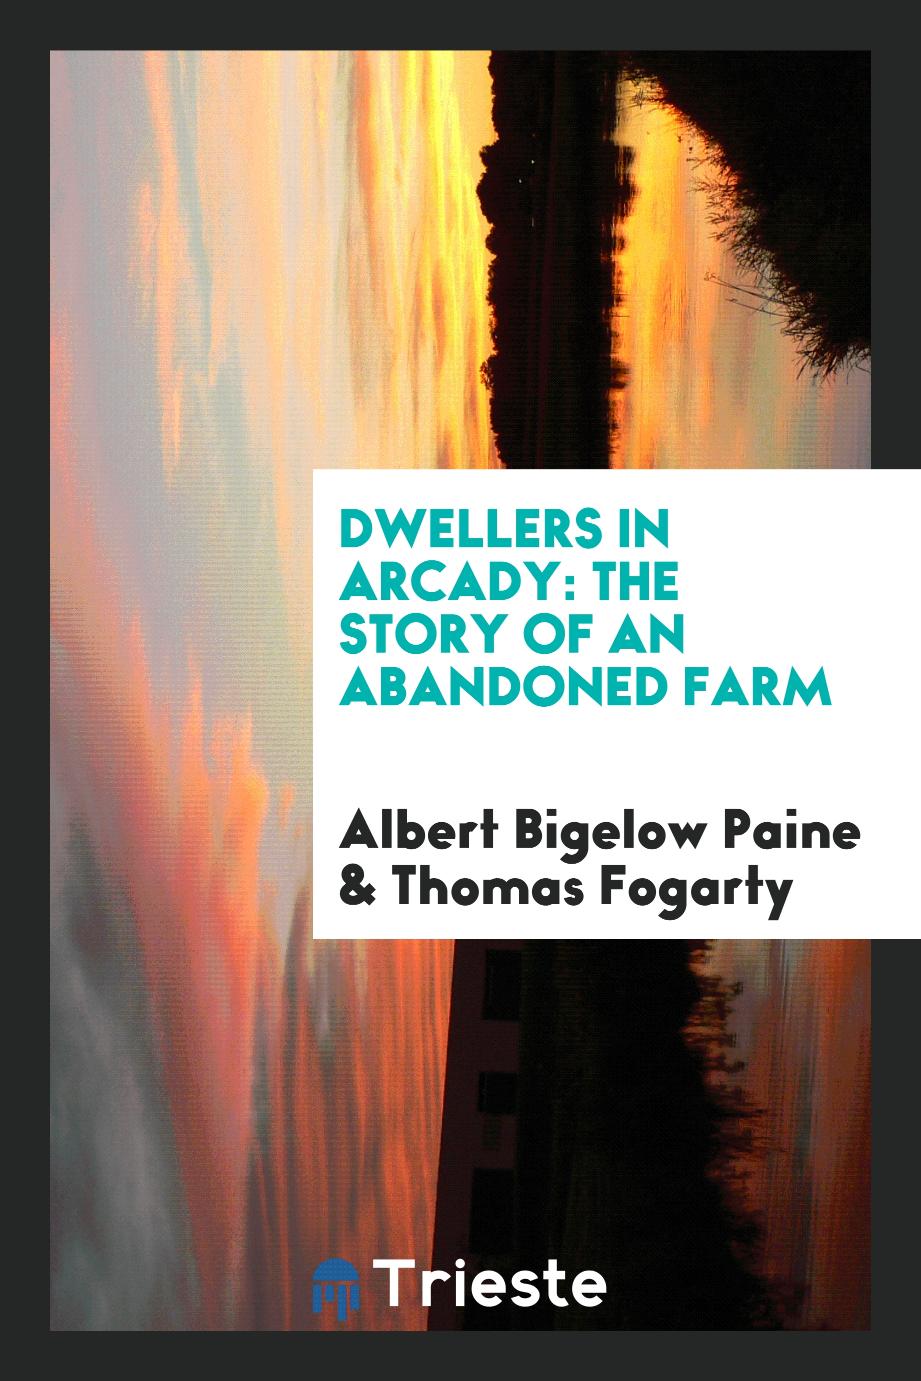 Albert Bigelow Paine, Thomas Fogarty - Dwellers in Arcady: The Story of an Abandoned Farm